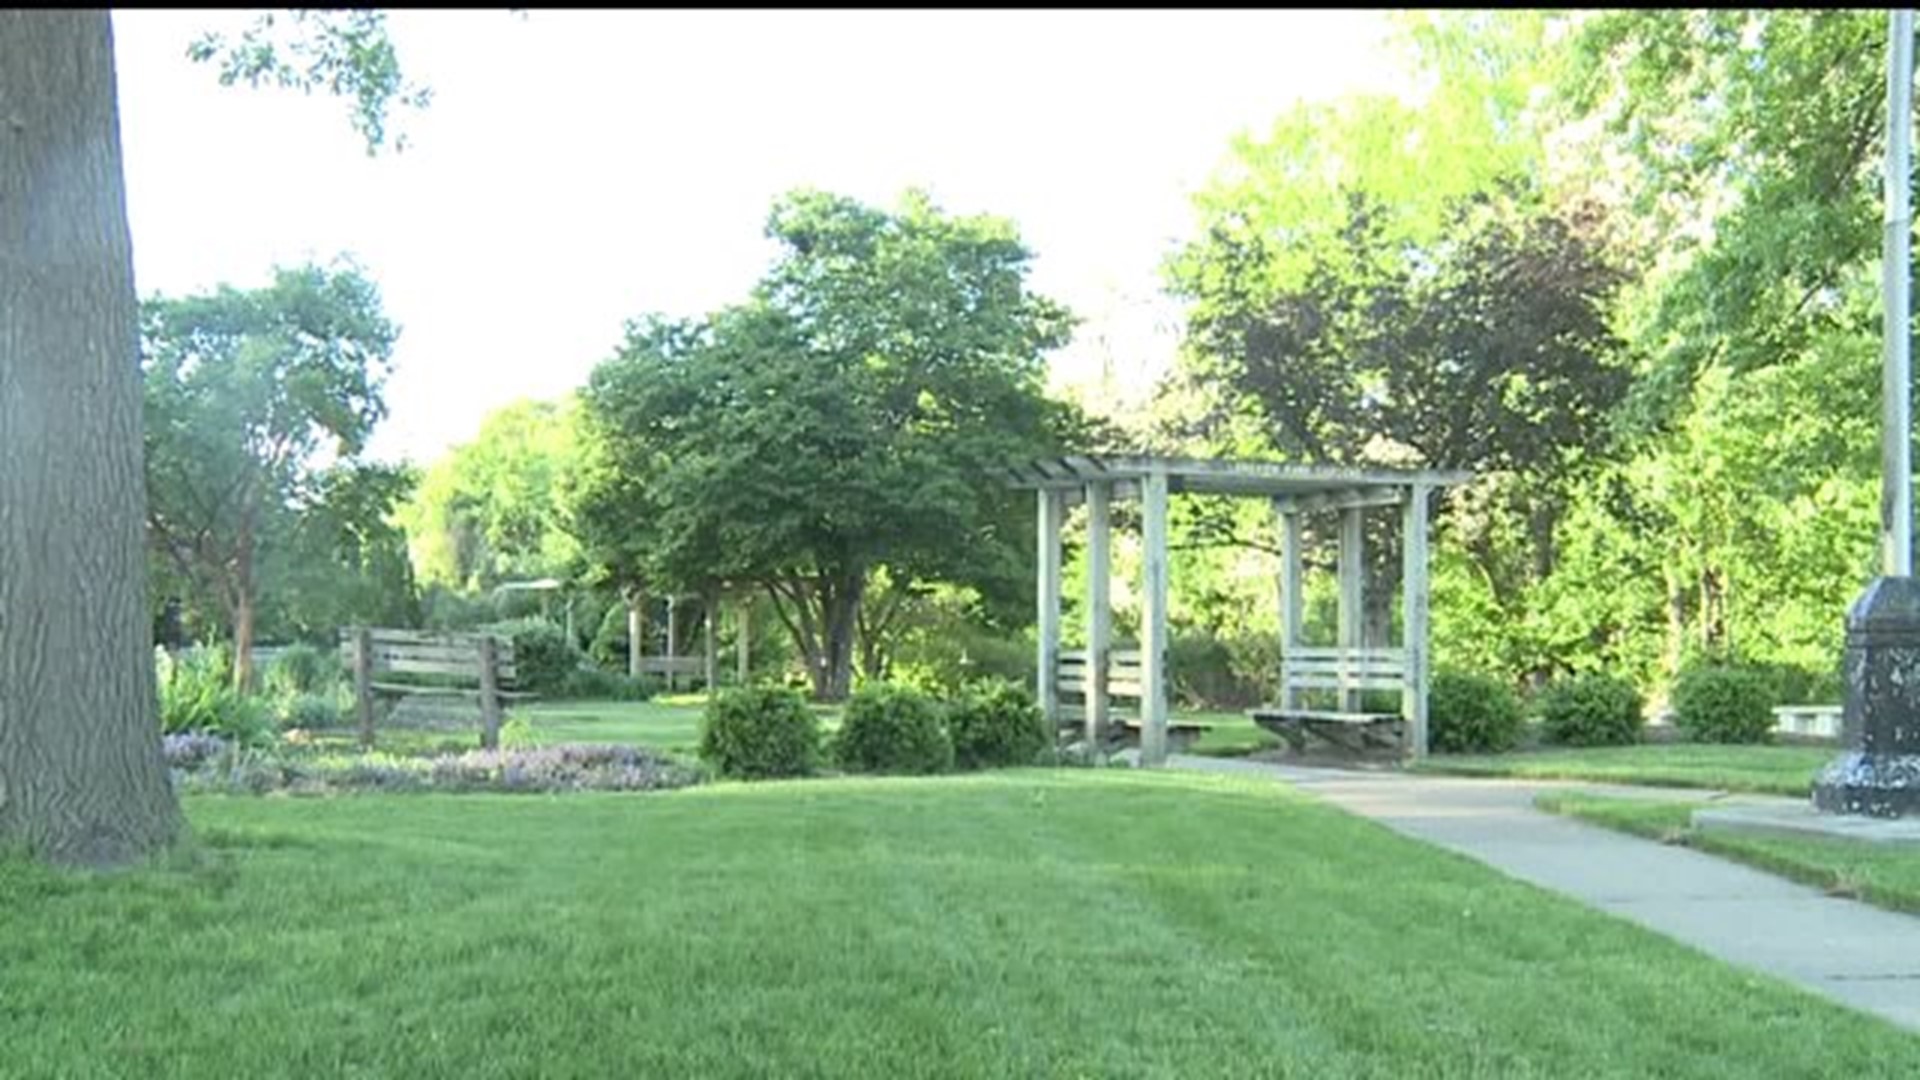 Outside funding plan for some Rock Island parks